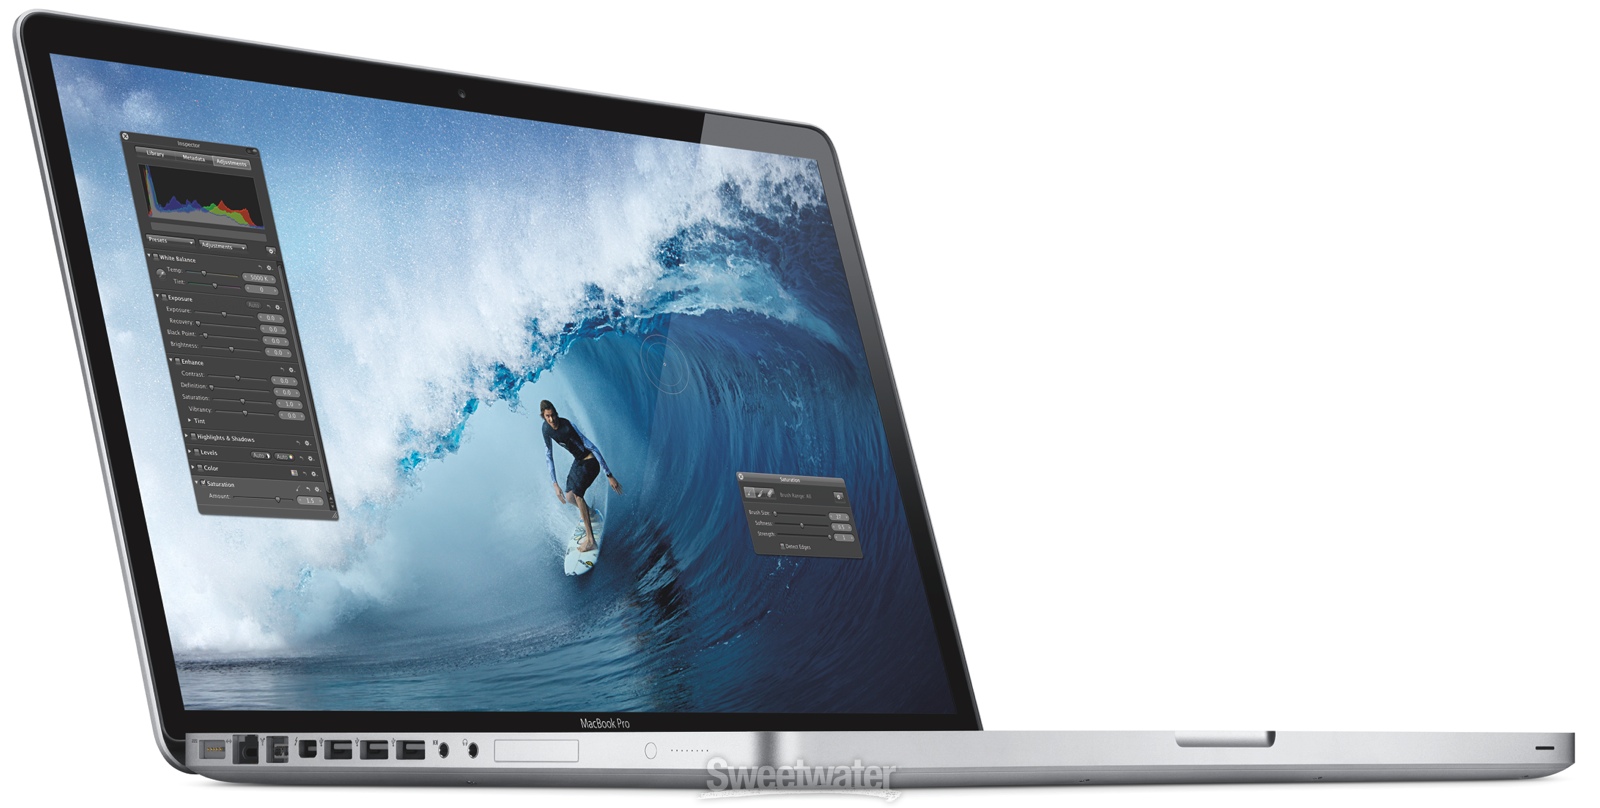 ... 27 inch IPS monitor was designed for Mac notebooks and desktops